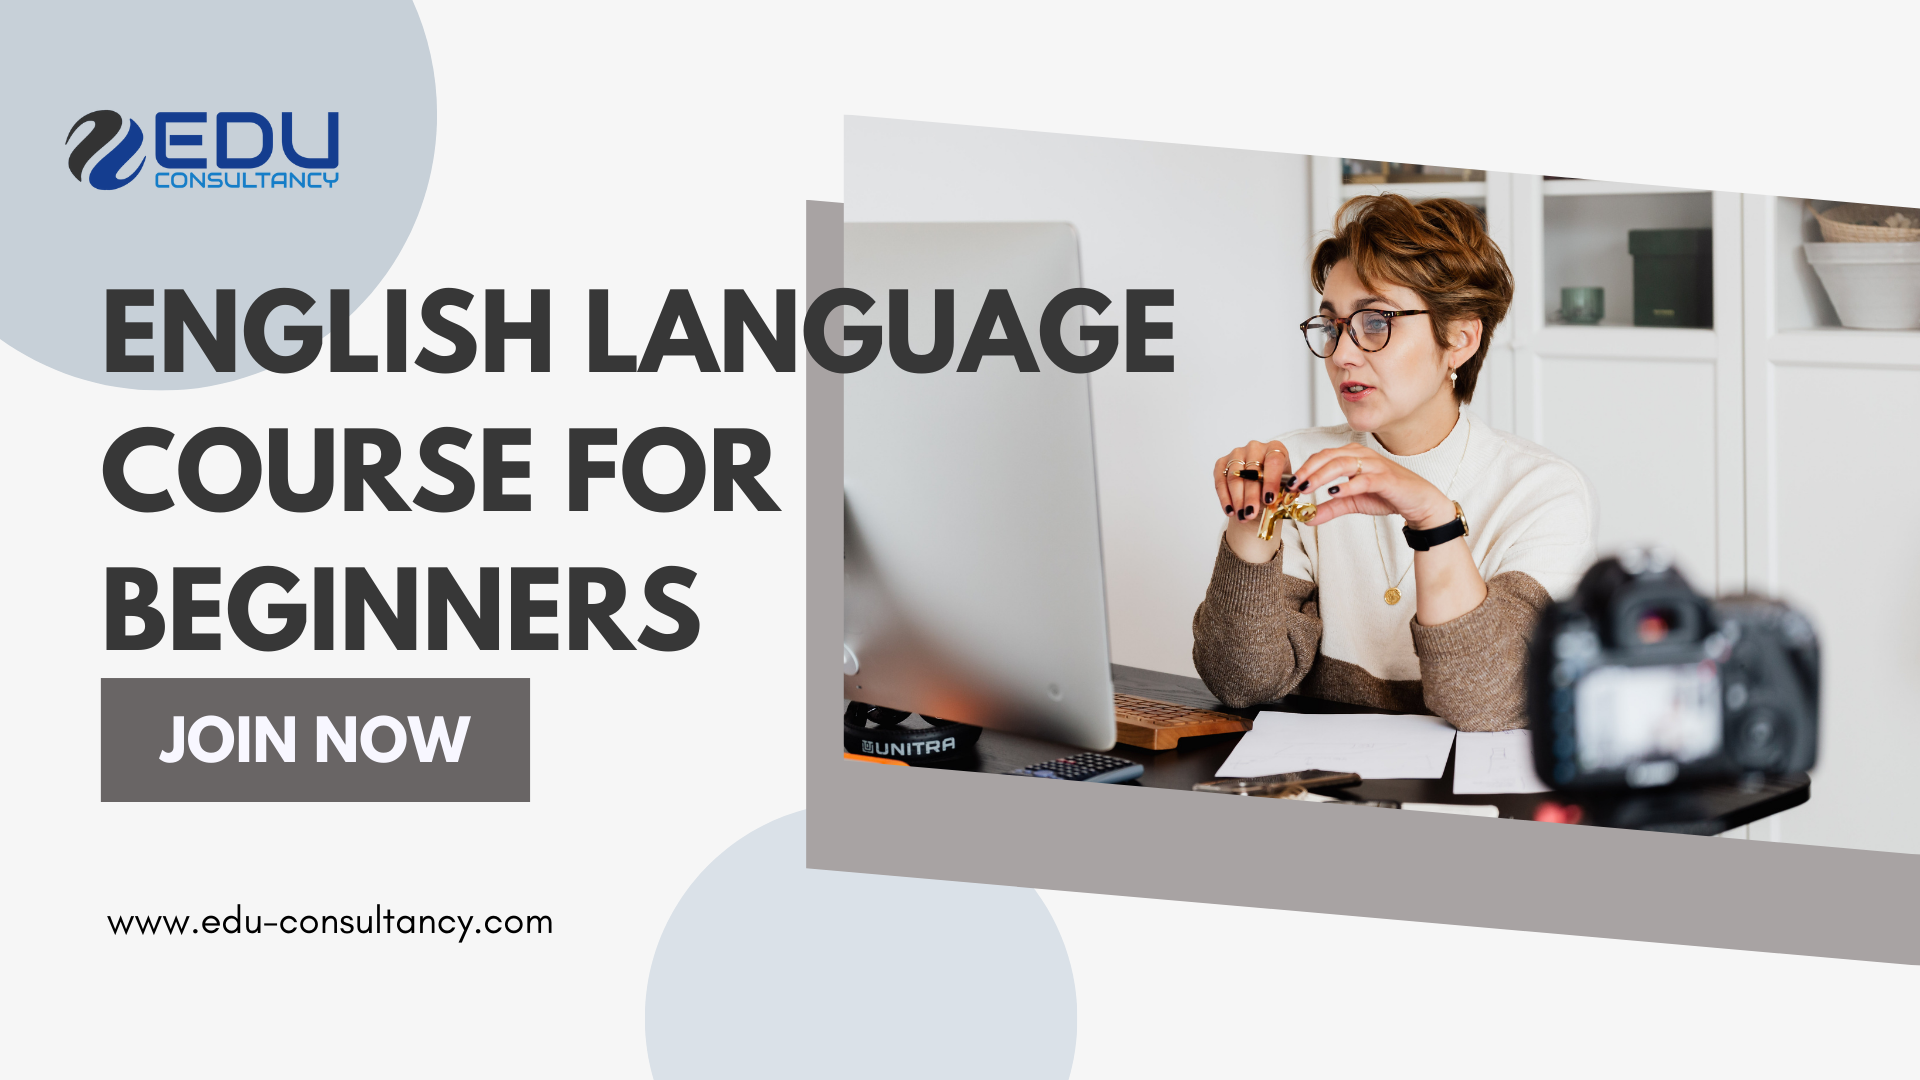 Enroll in English Language Course for Beginners